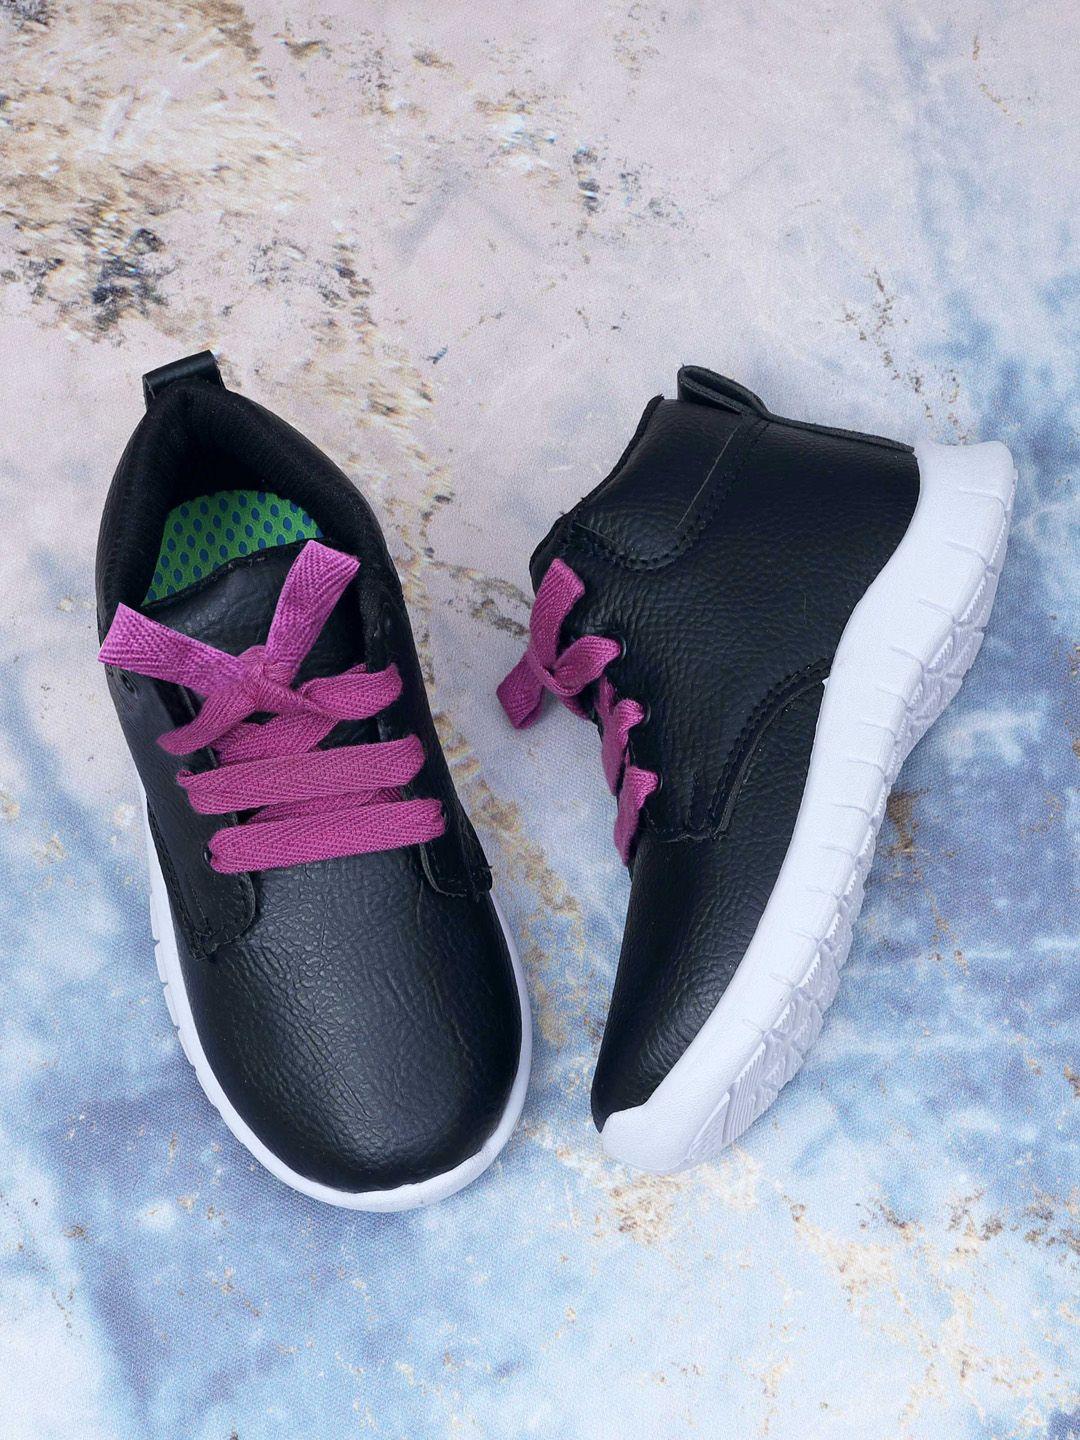 dchica girls black & pink high top casual sneakers